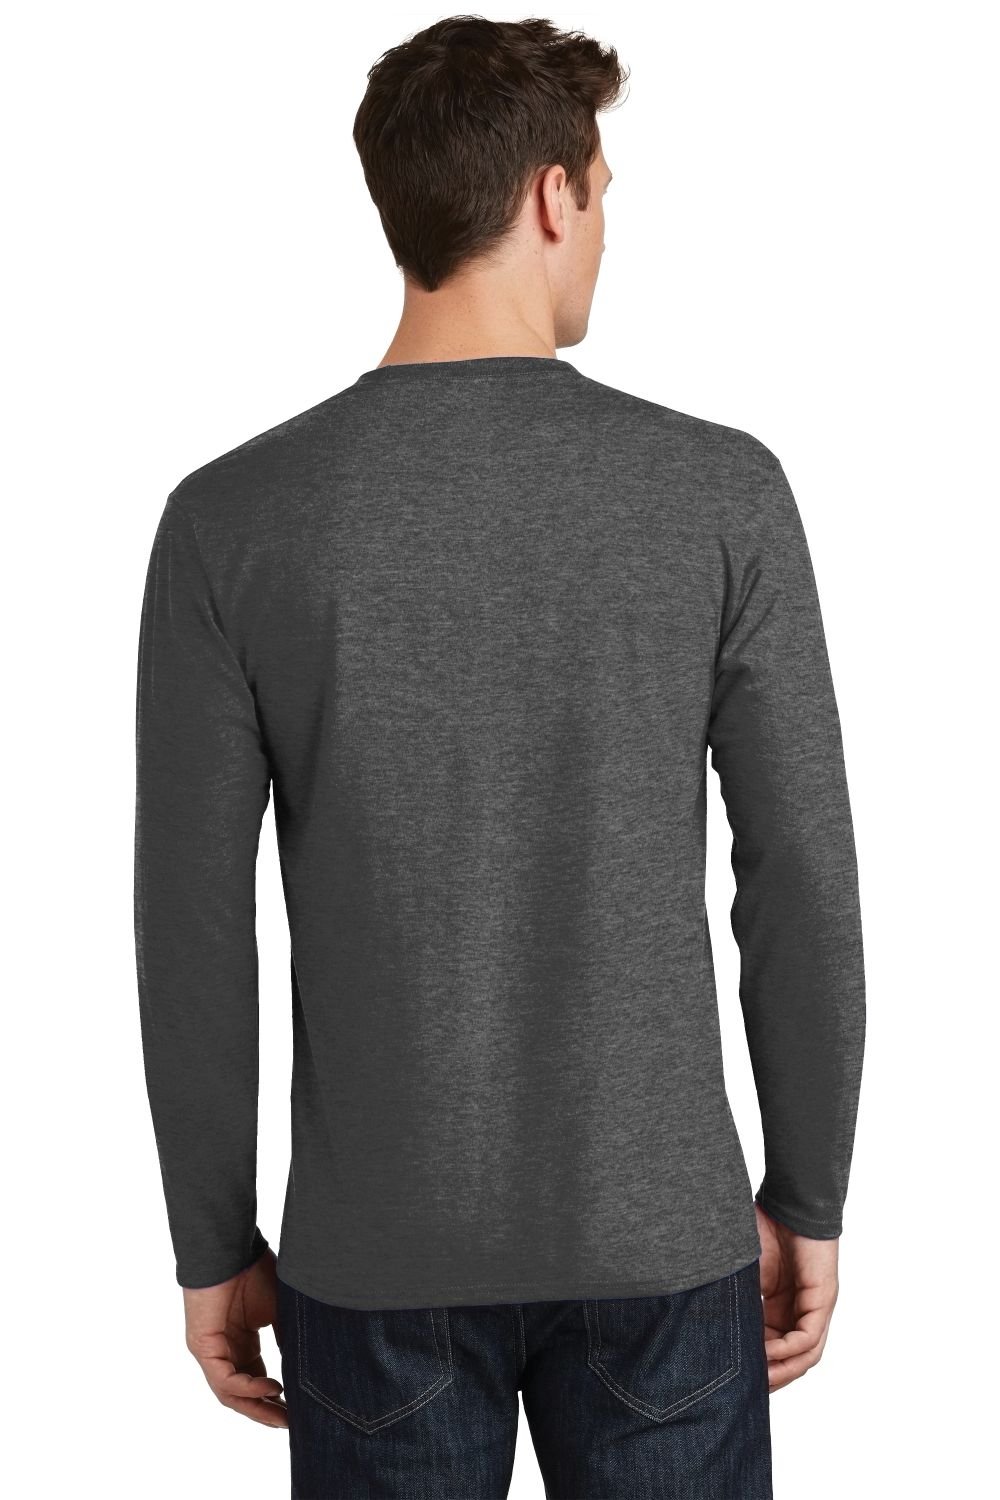 PORT AND COMPANY Long Sleeve Fan Favorite Tee (PC450LS)